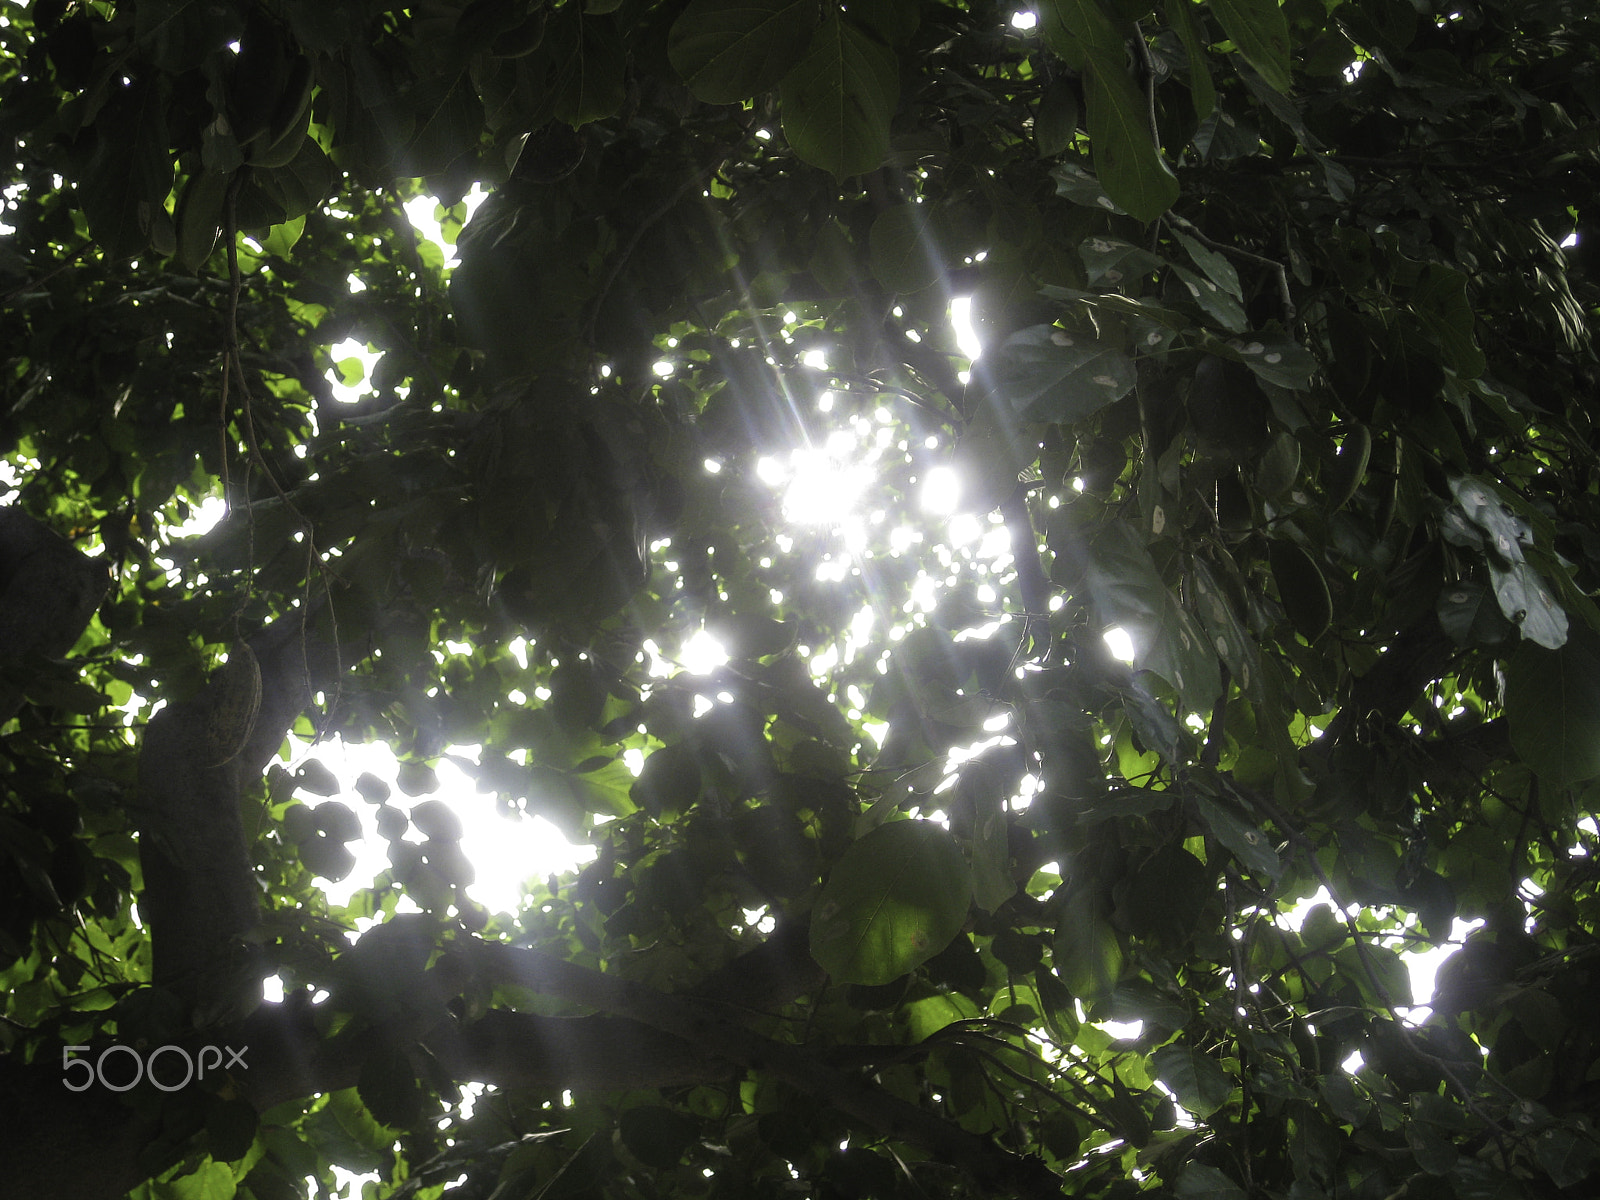 Canon POWERSHOT SD850 IS sample photo. Sunlight streaming through the fronds of a lush thick tree photography